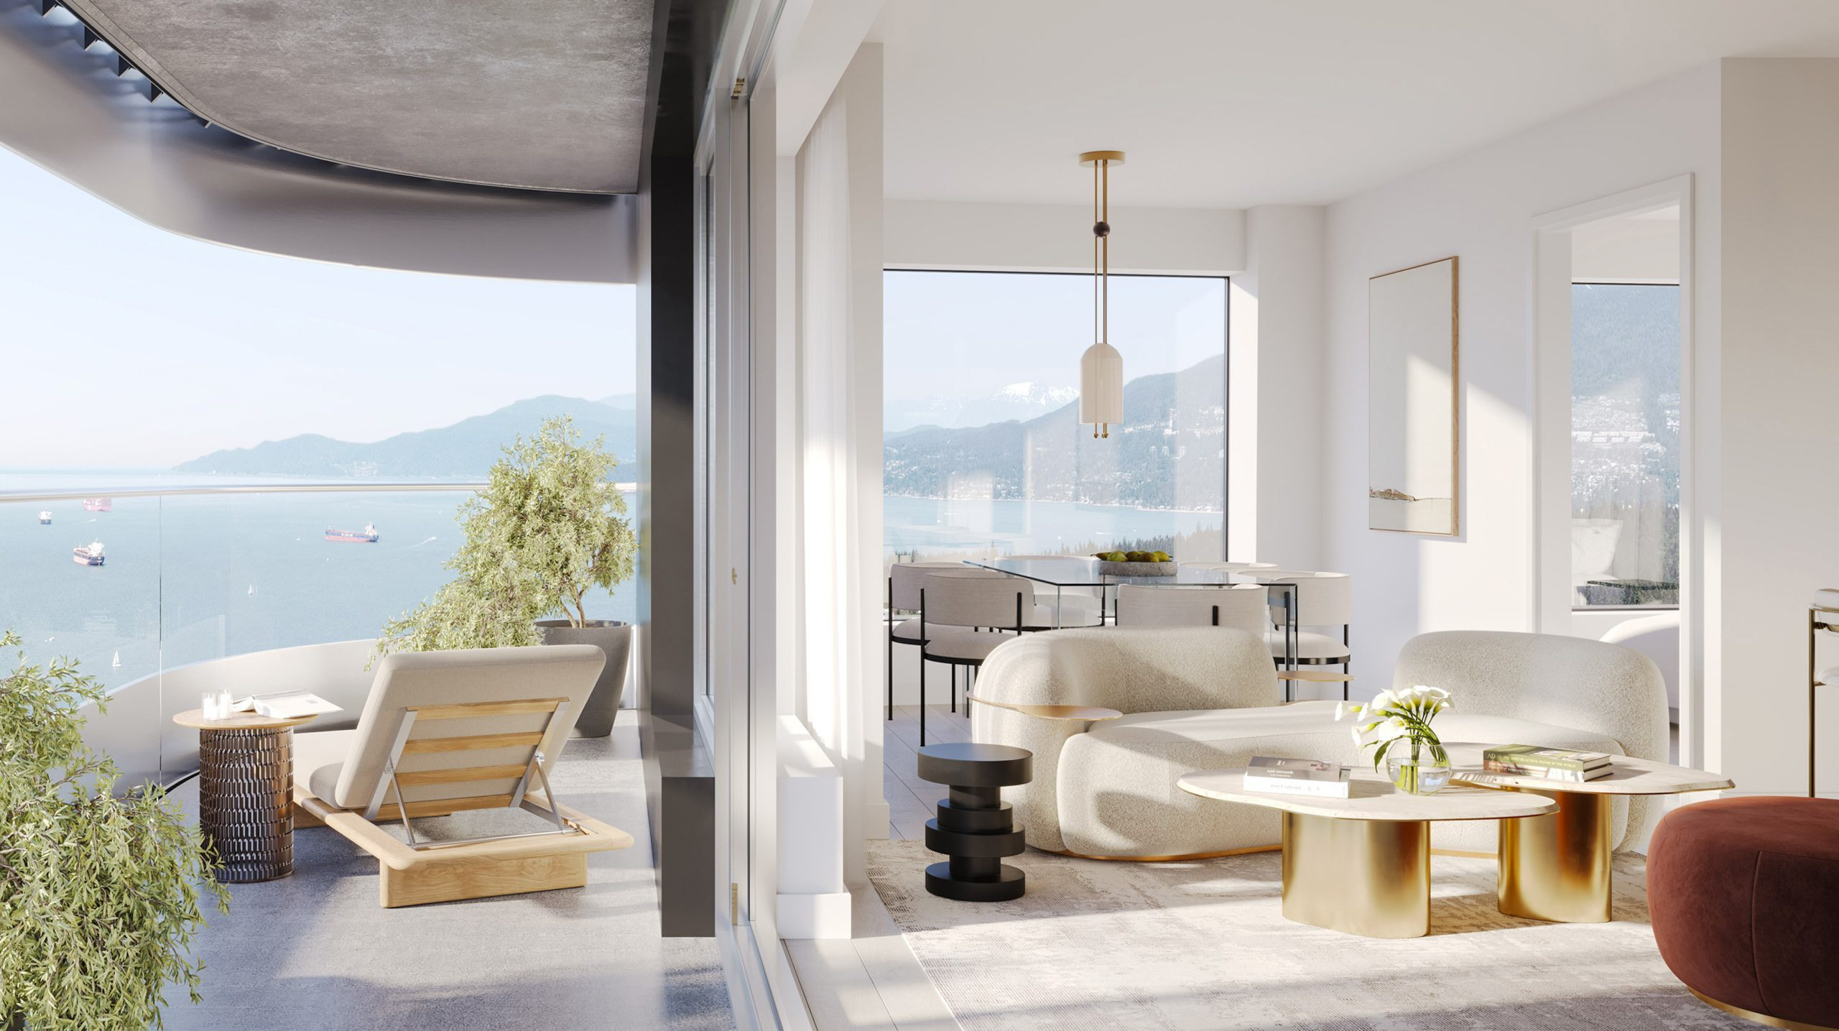 Exclusive Residences - CURV is Set to Reshape Luxury Condo Living in Downtown Vancouver